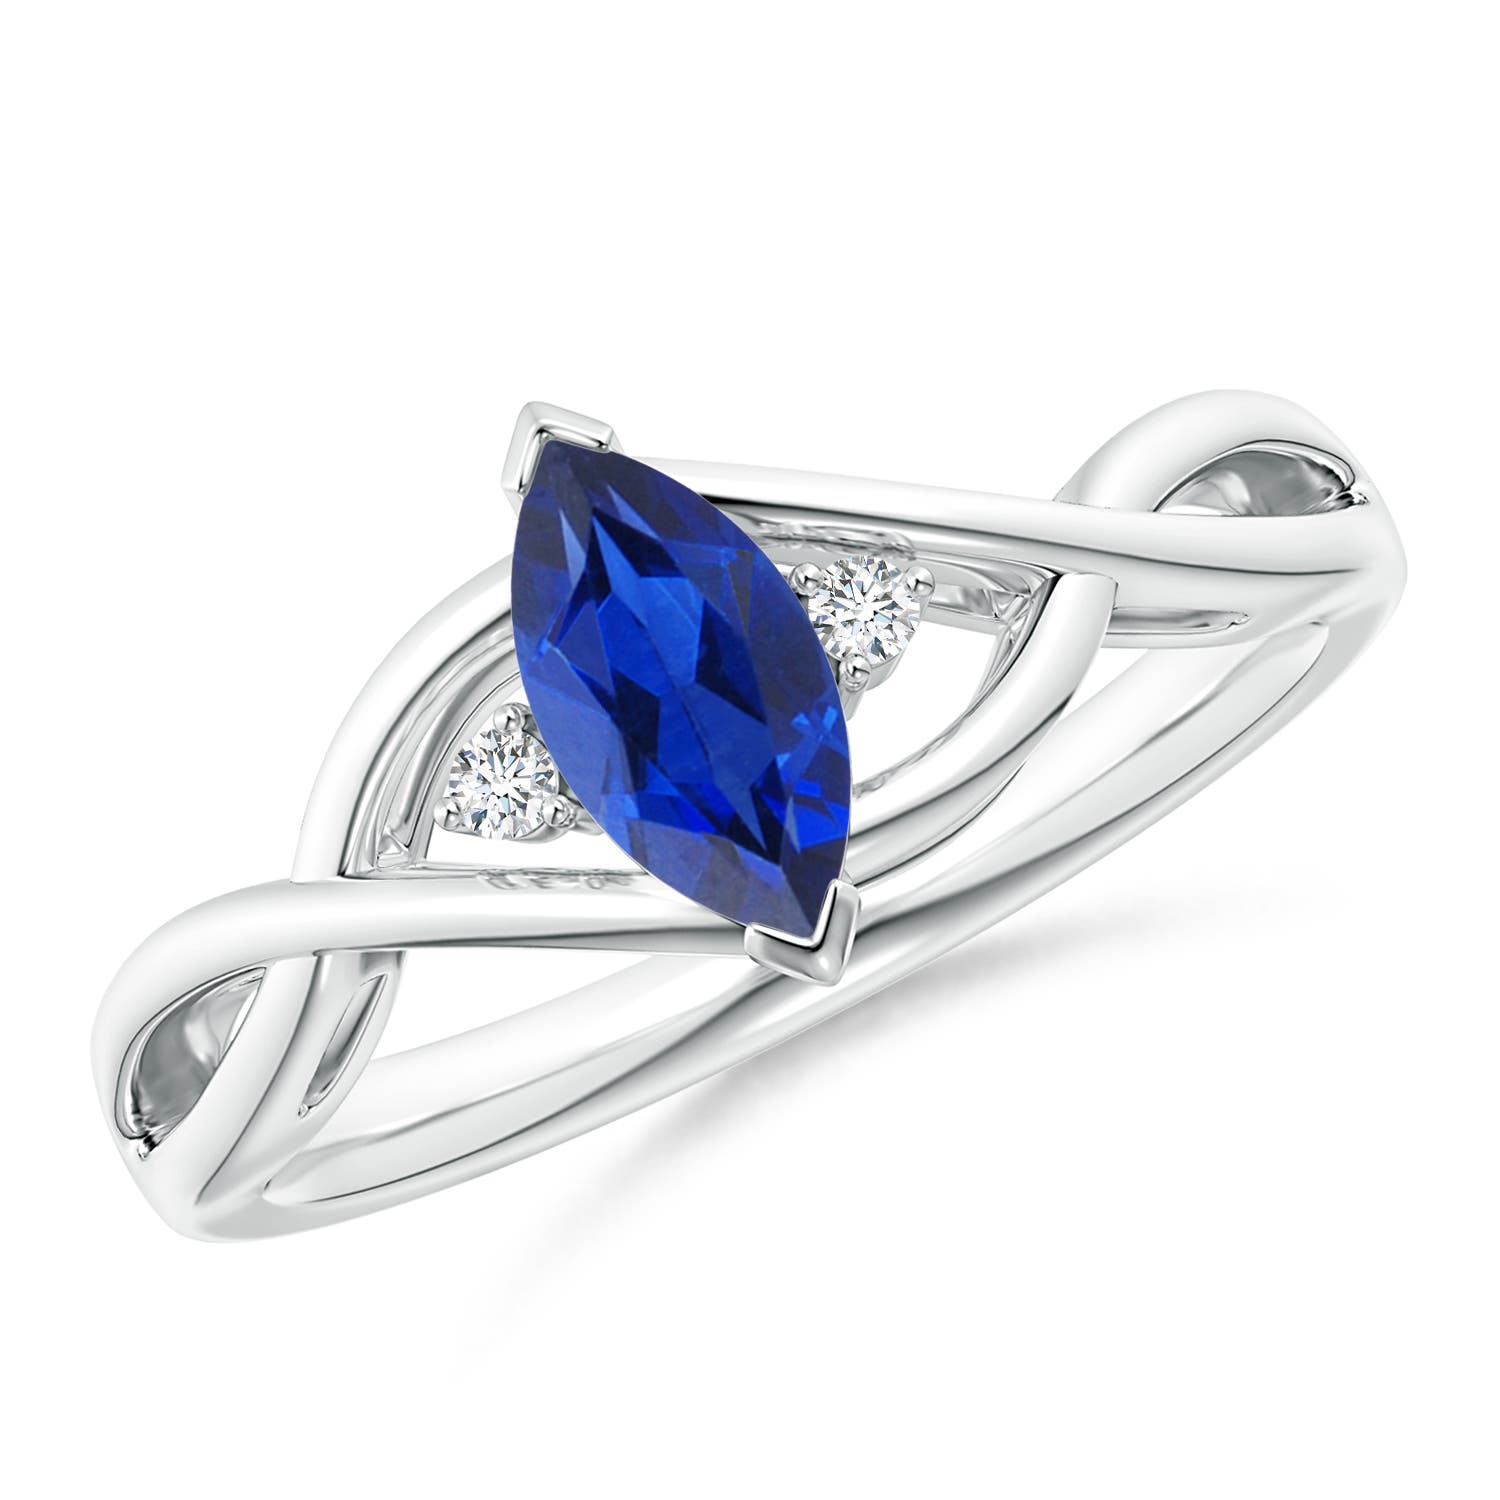 AAA - Blue Sapphire / 0.63 CT / 14 KT White Gold